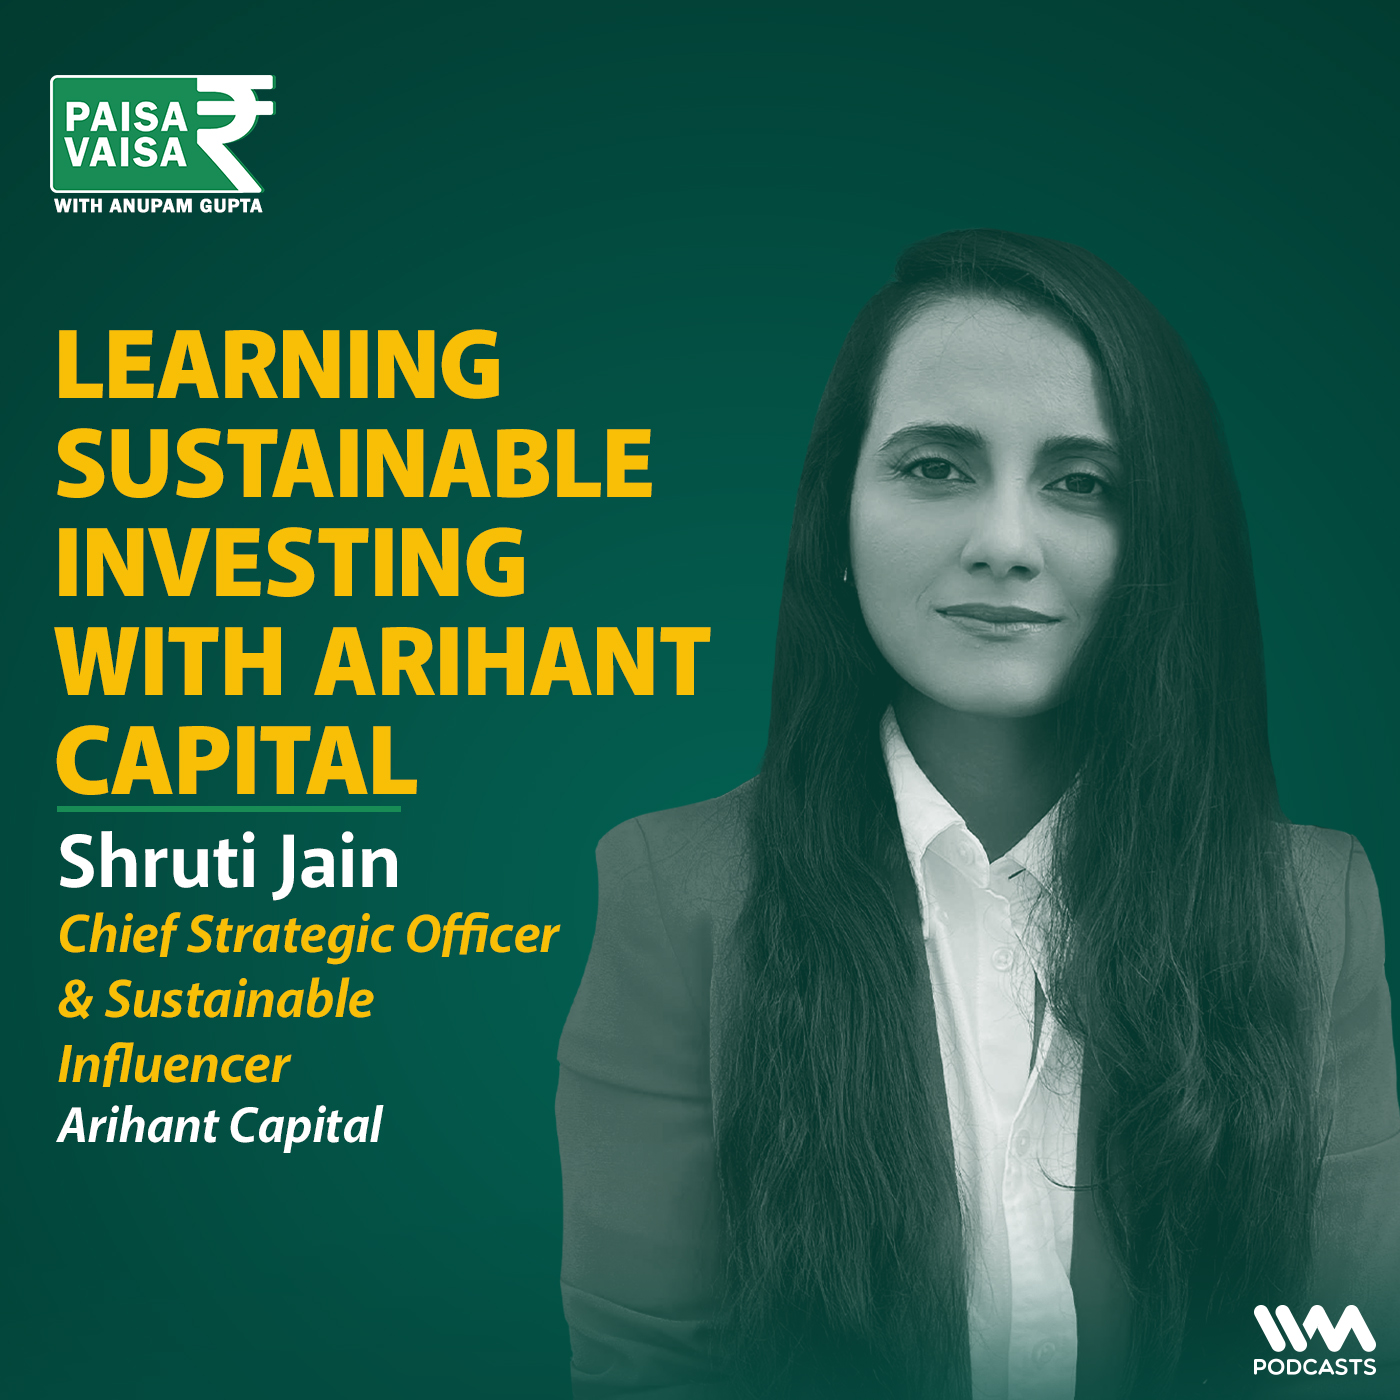 Learning Sustainable Investing with Arihant Capital